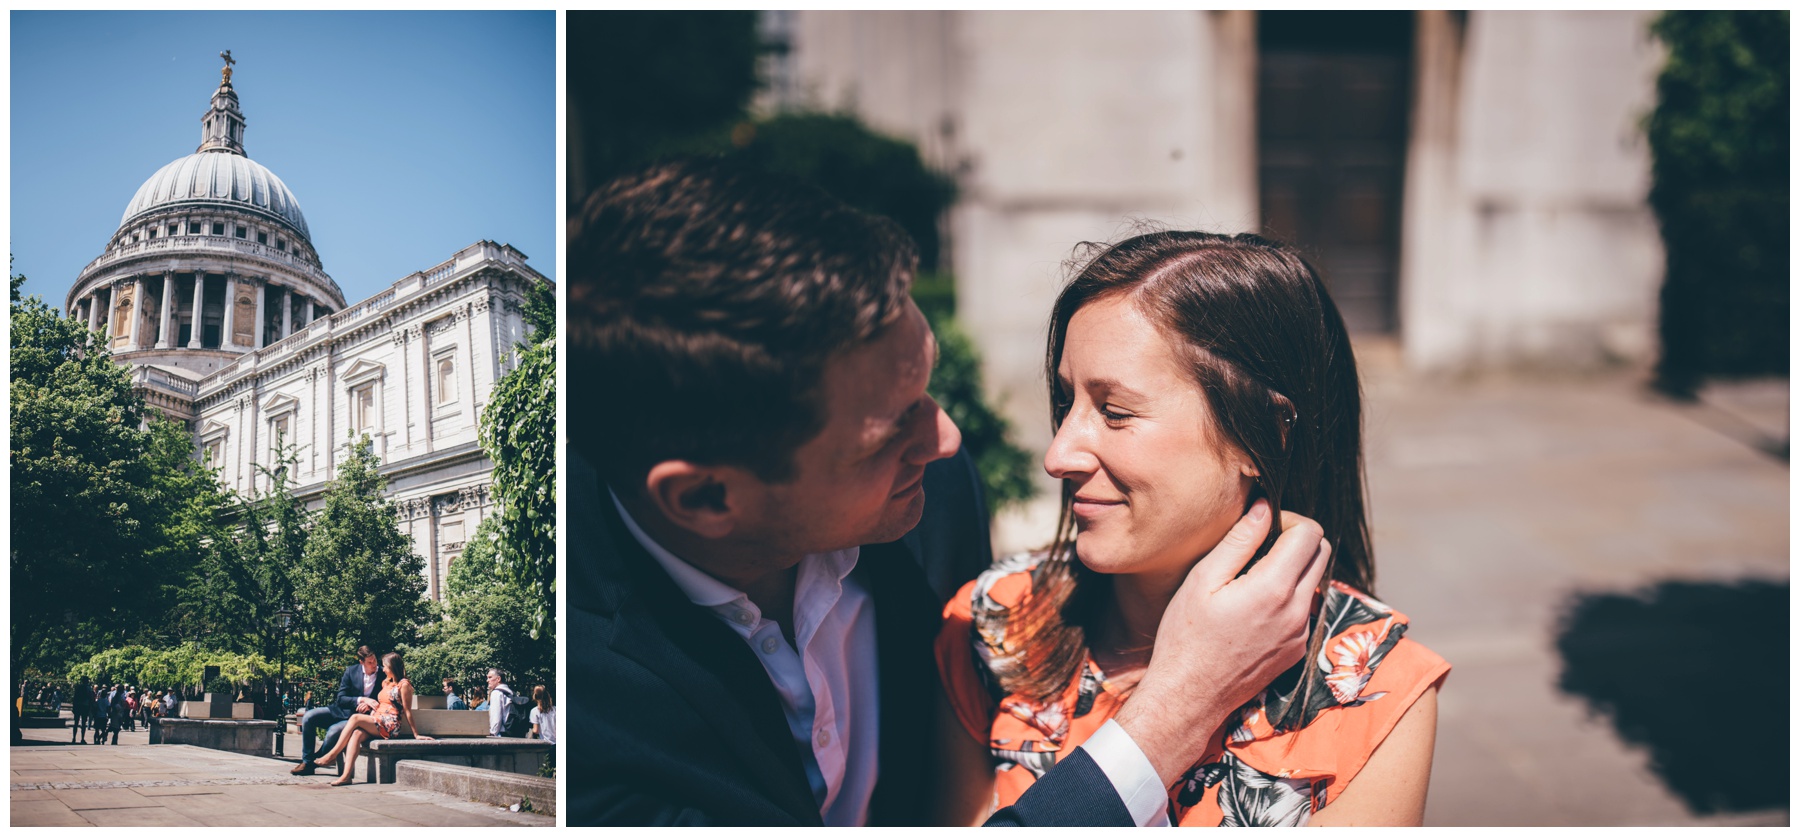 Summer wedding photoshoot near St Paul's Cathedral in London city centre.